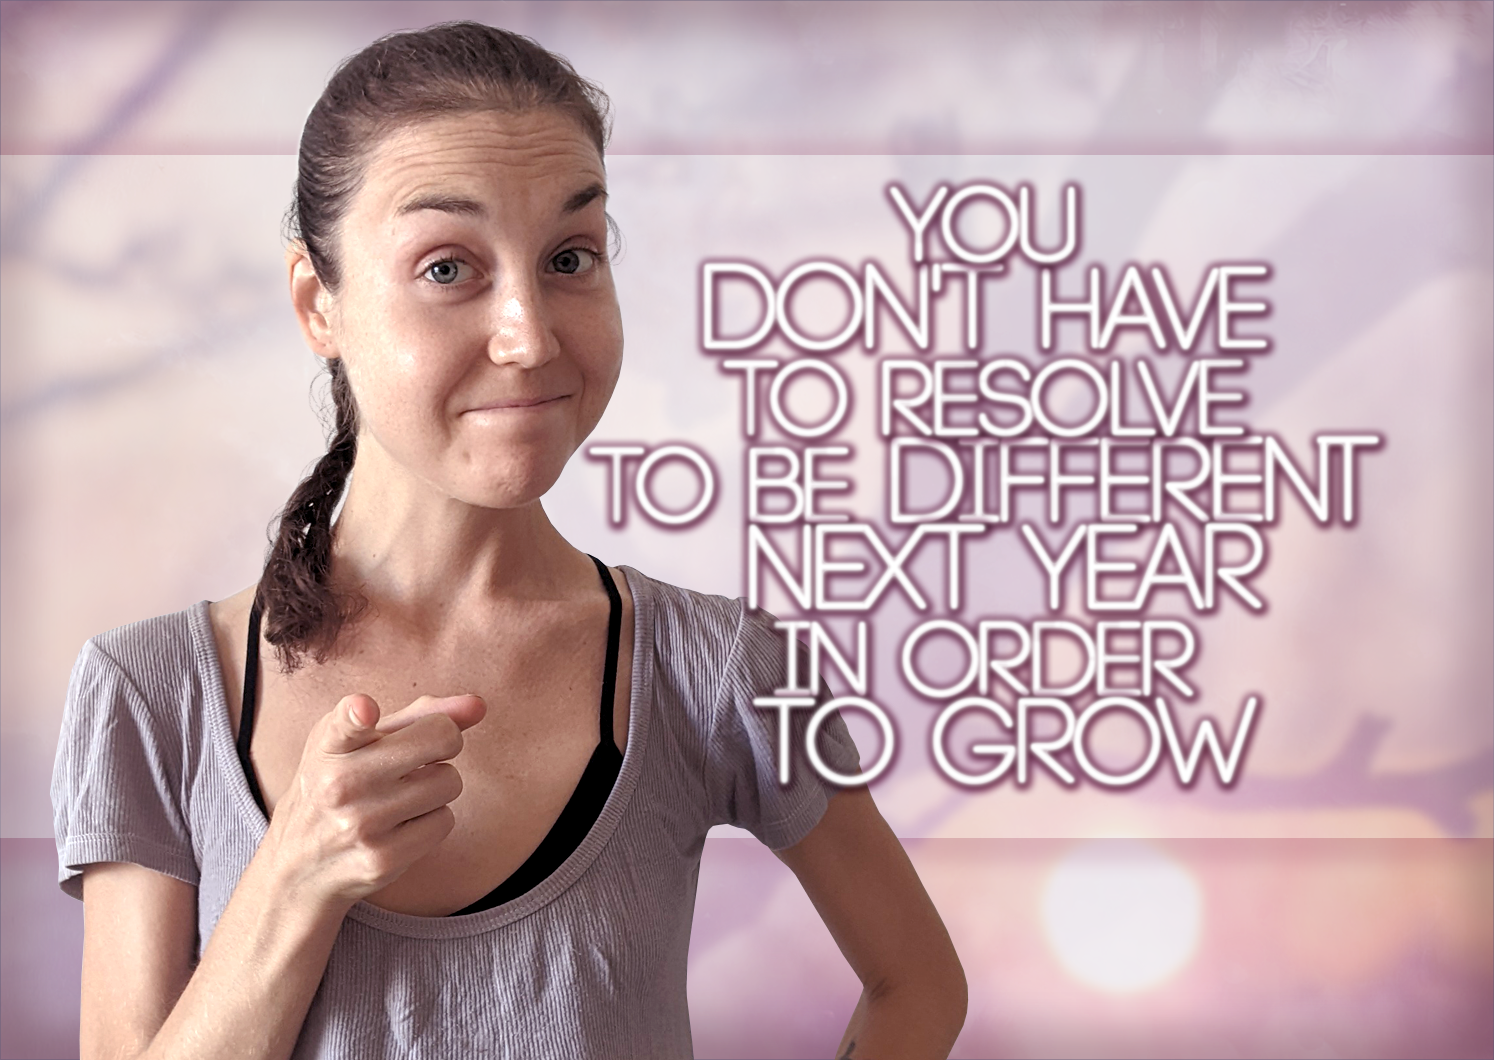 You Don’t Have To Resolve To be Different Next Year In Order To Grow